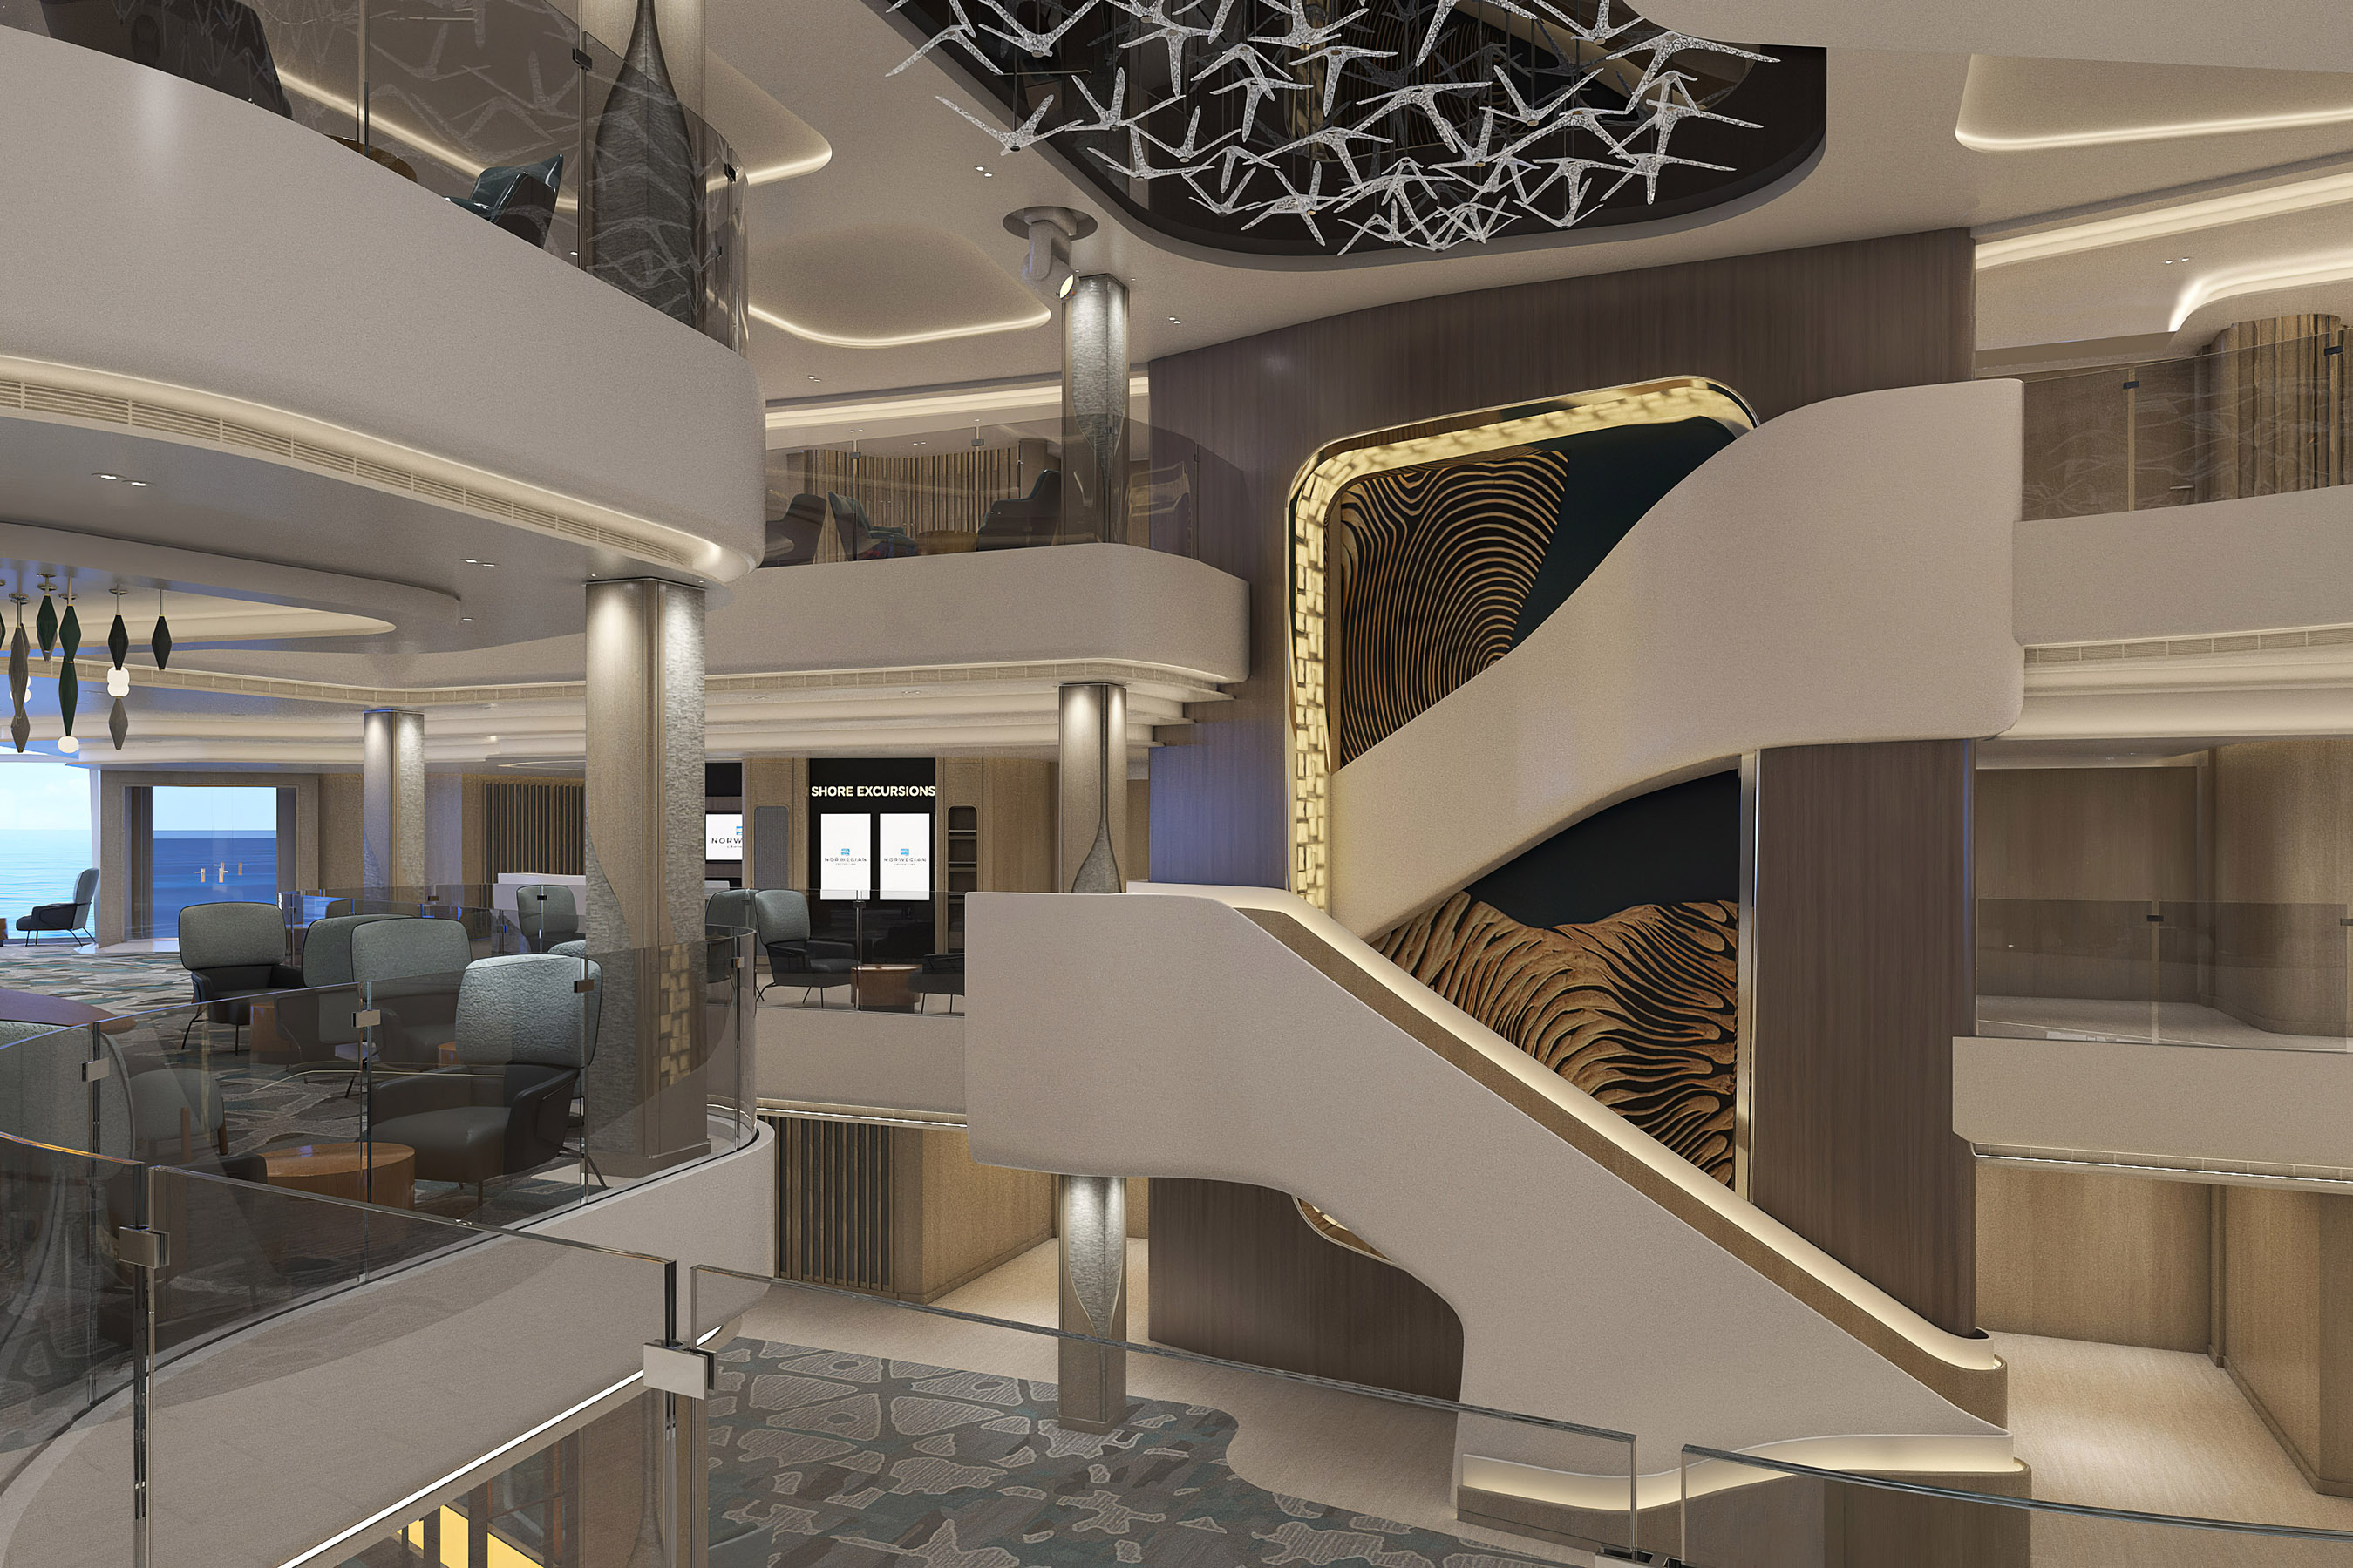 Five of the six NFT art pieces showcase some of the innovative 3D designs often depicted in Peeta’s works and will be featured aboard Norwegian Prima including in the ship’s three-level Penrose Atrium.